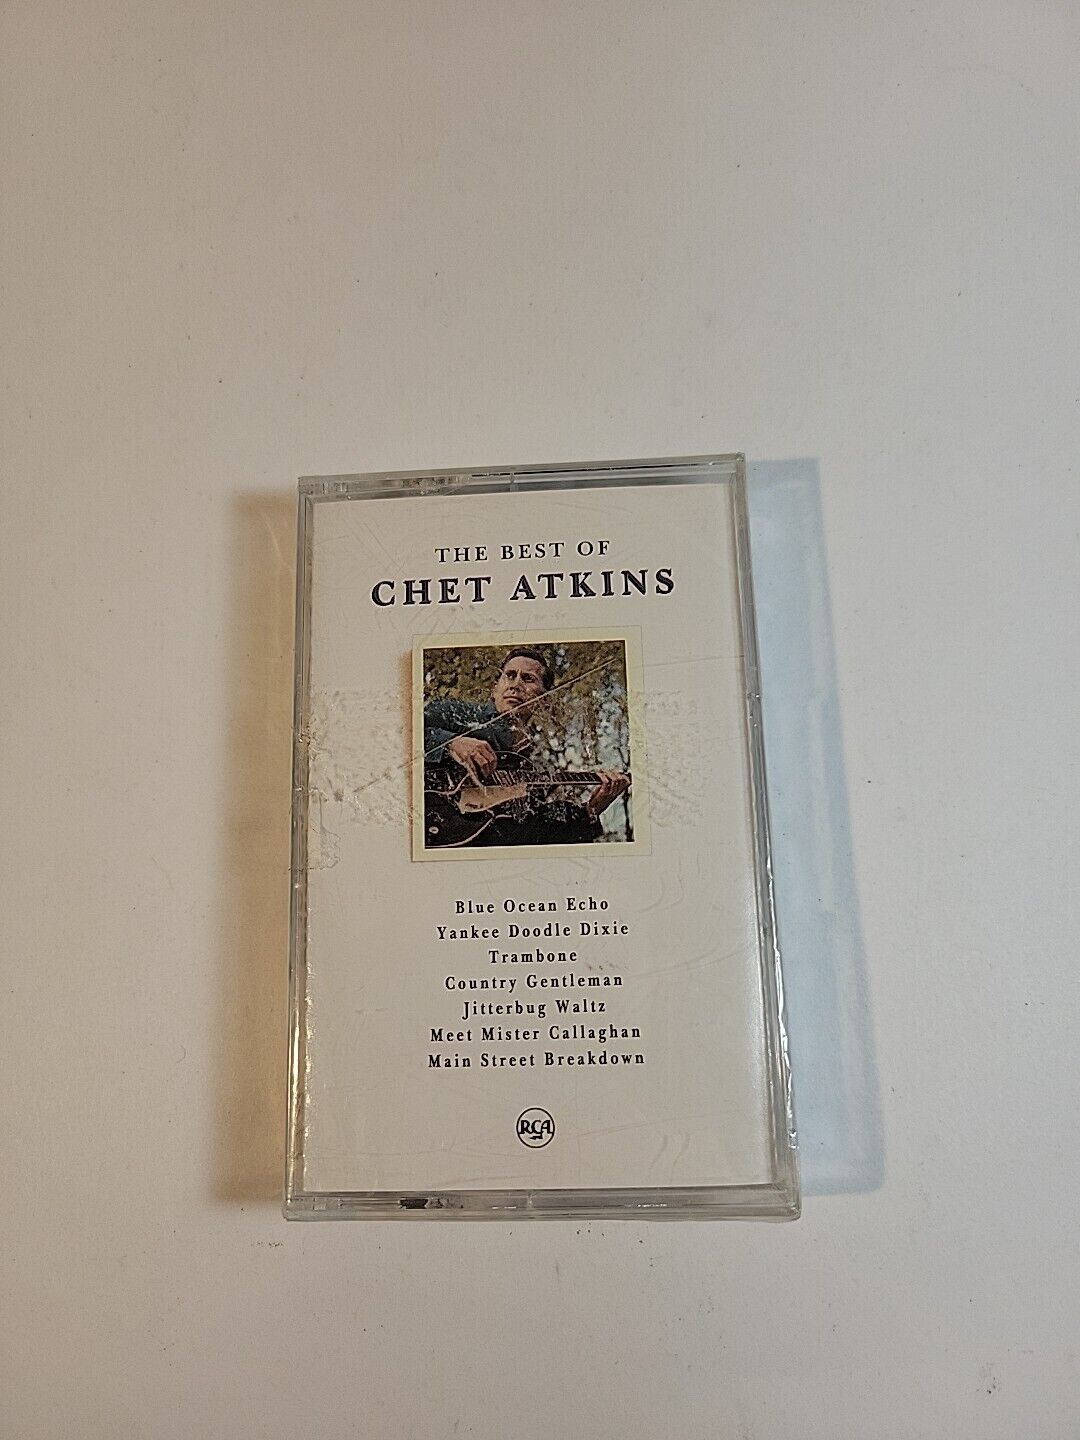 The Best Of Chet Atkins (1992 Cassette Tape)